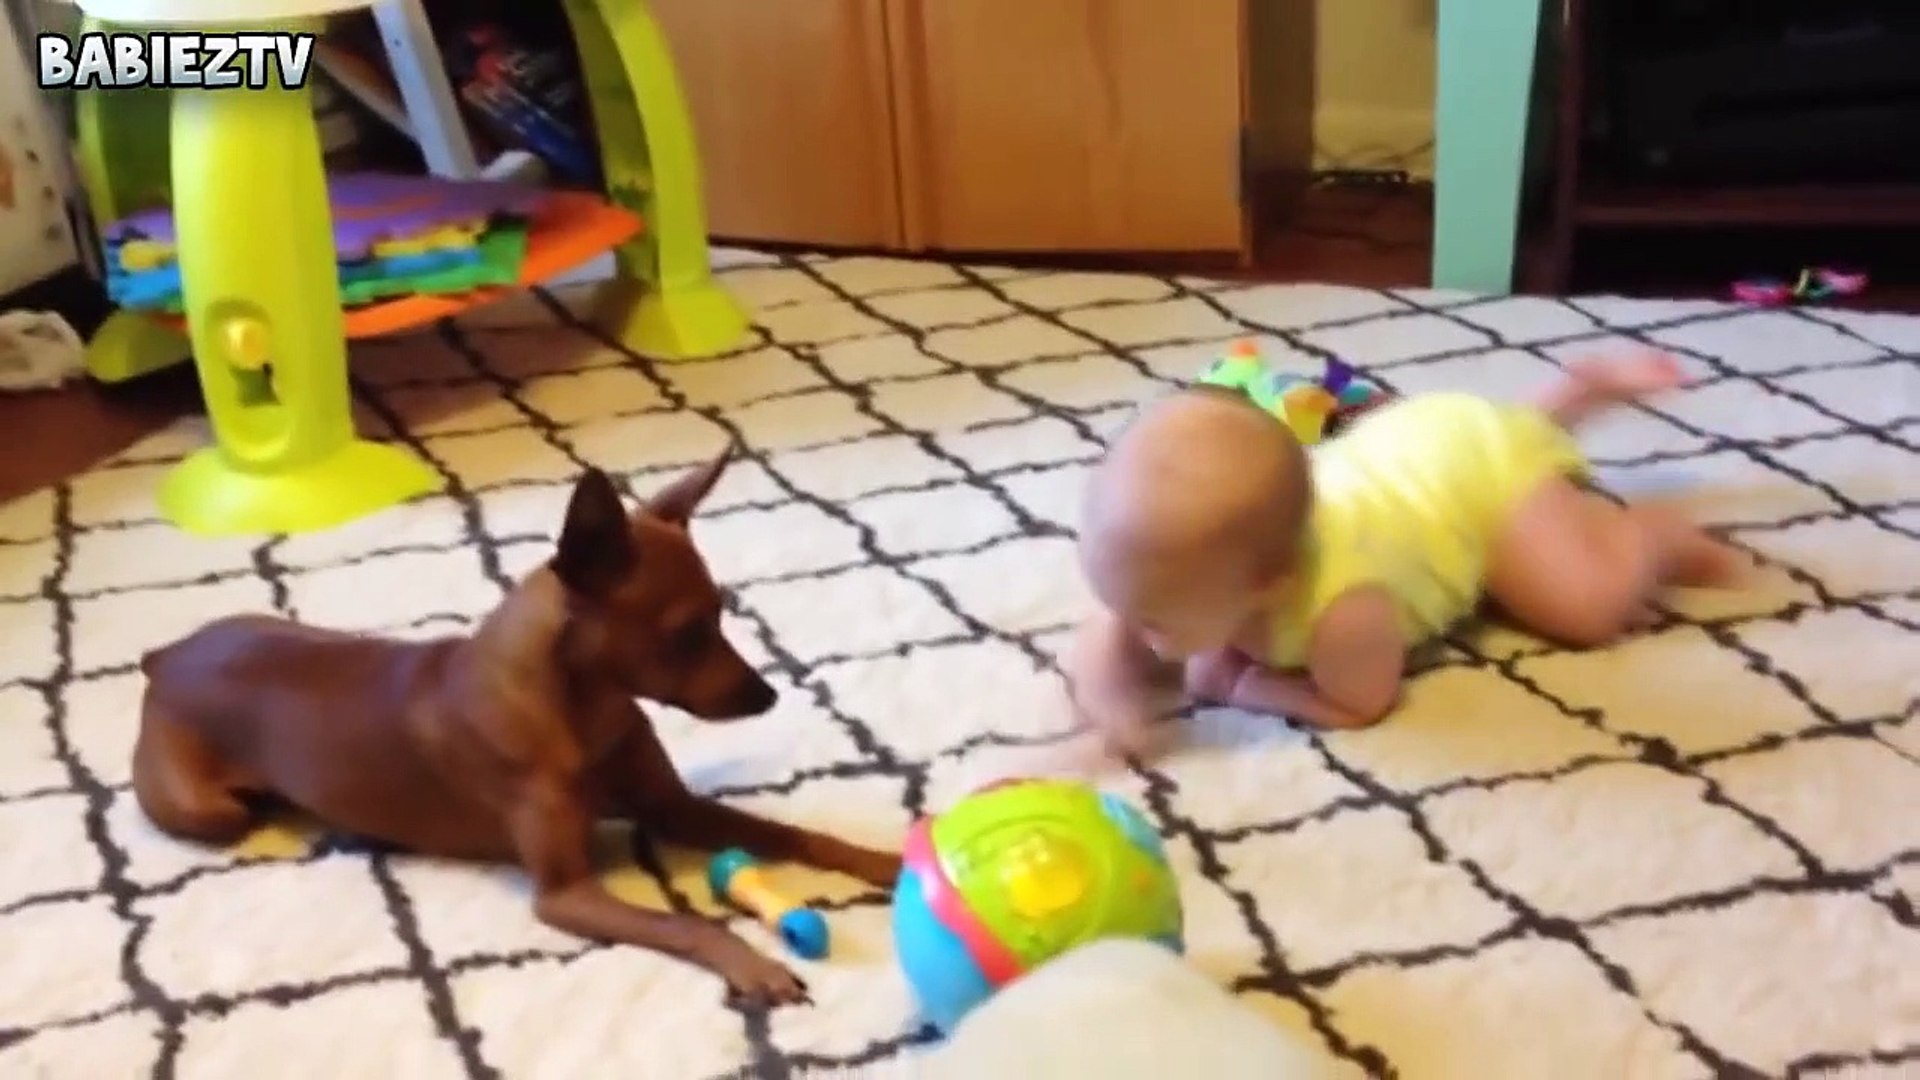 Cute Dogs and Babies Crawling Together - Adorable babies